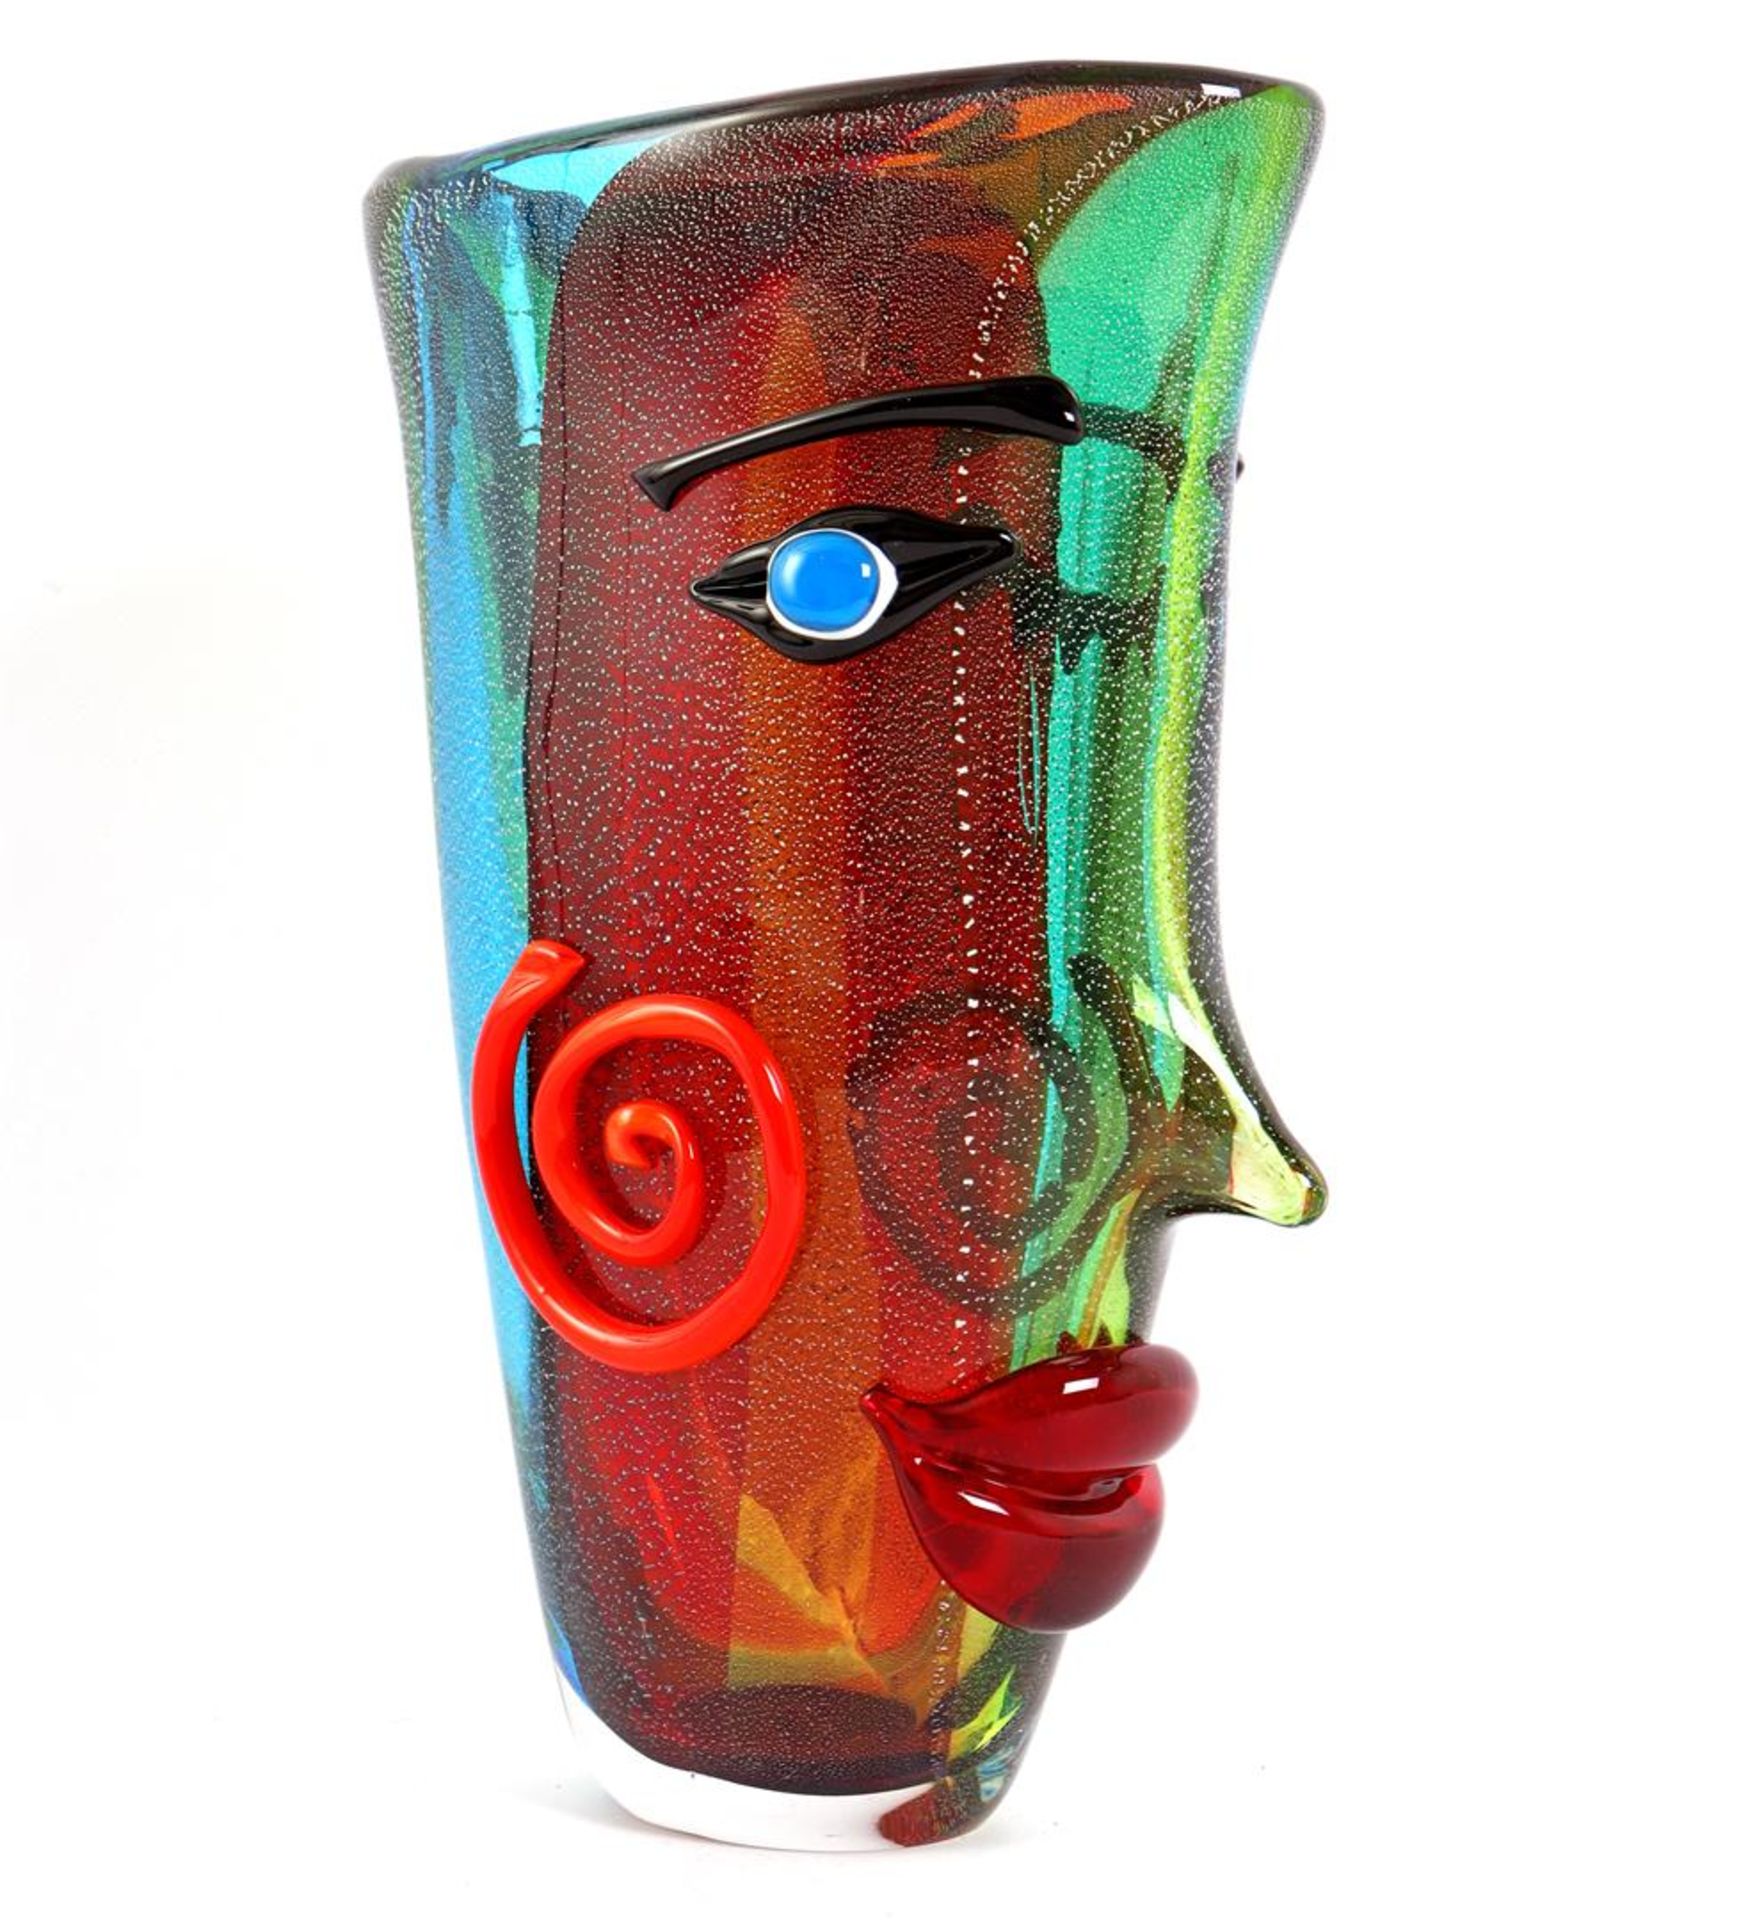 Colored glass vase with face